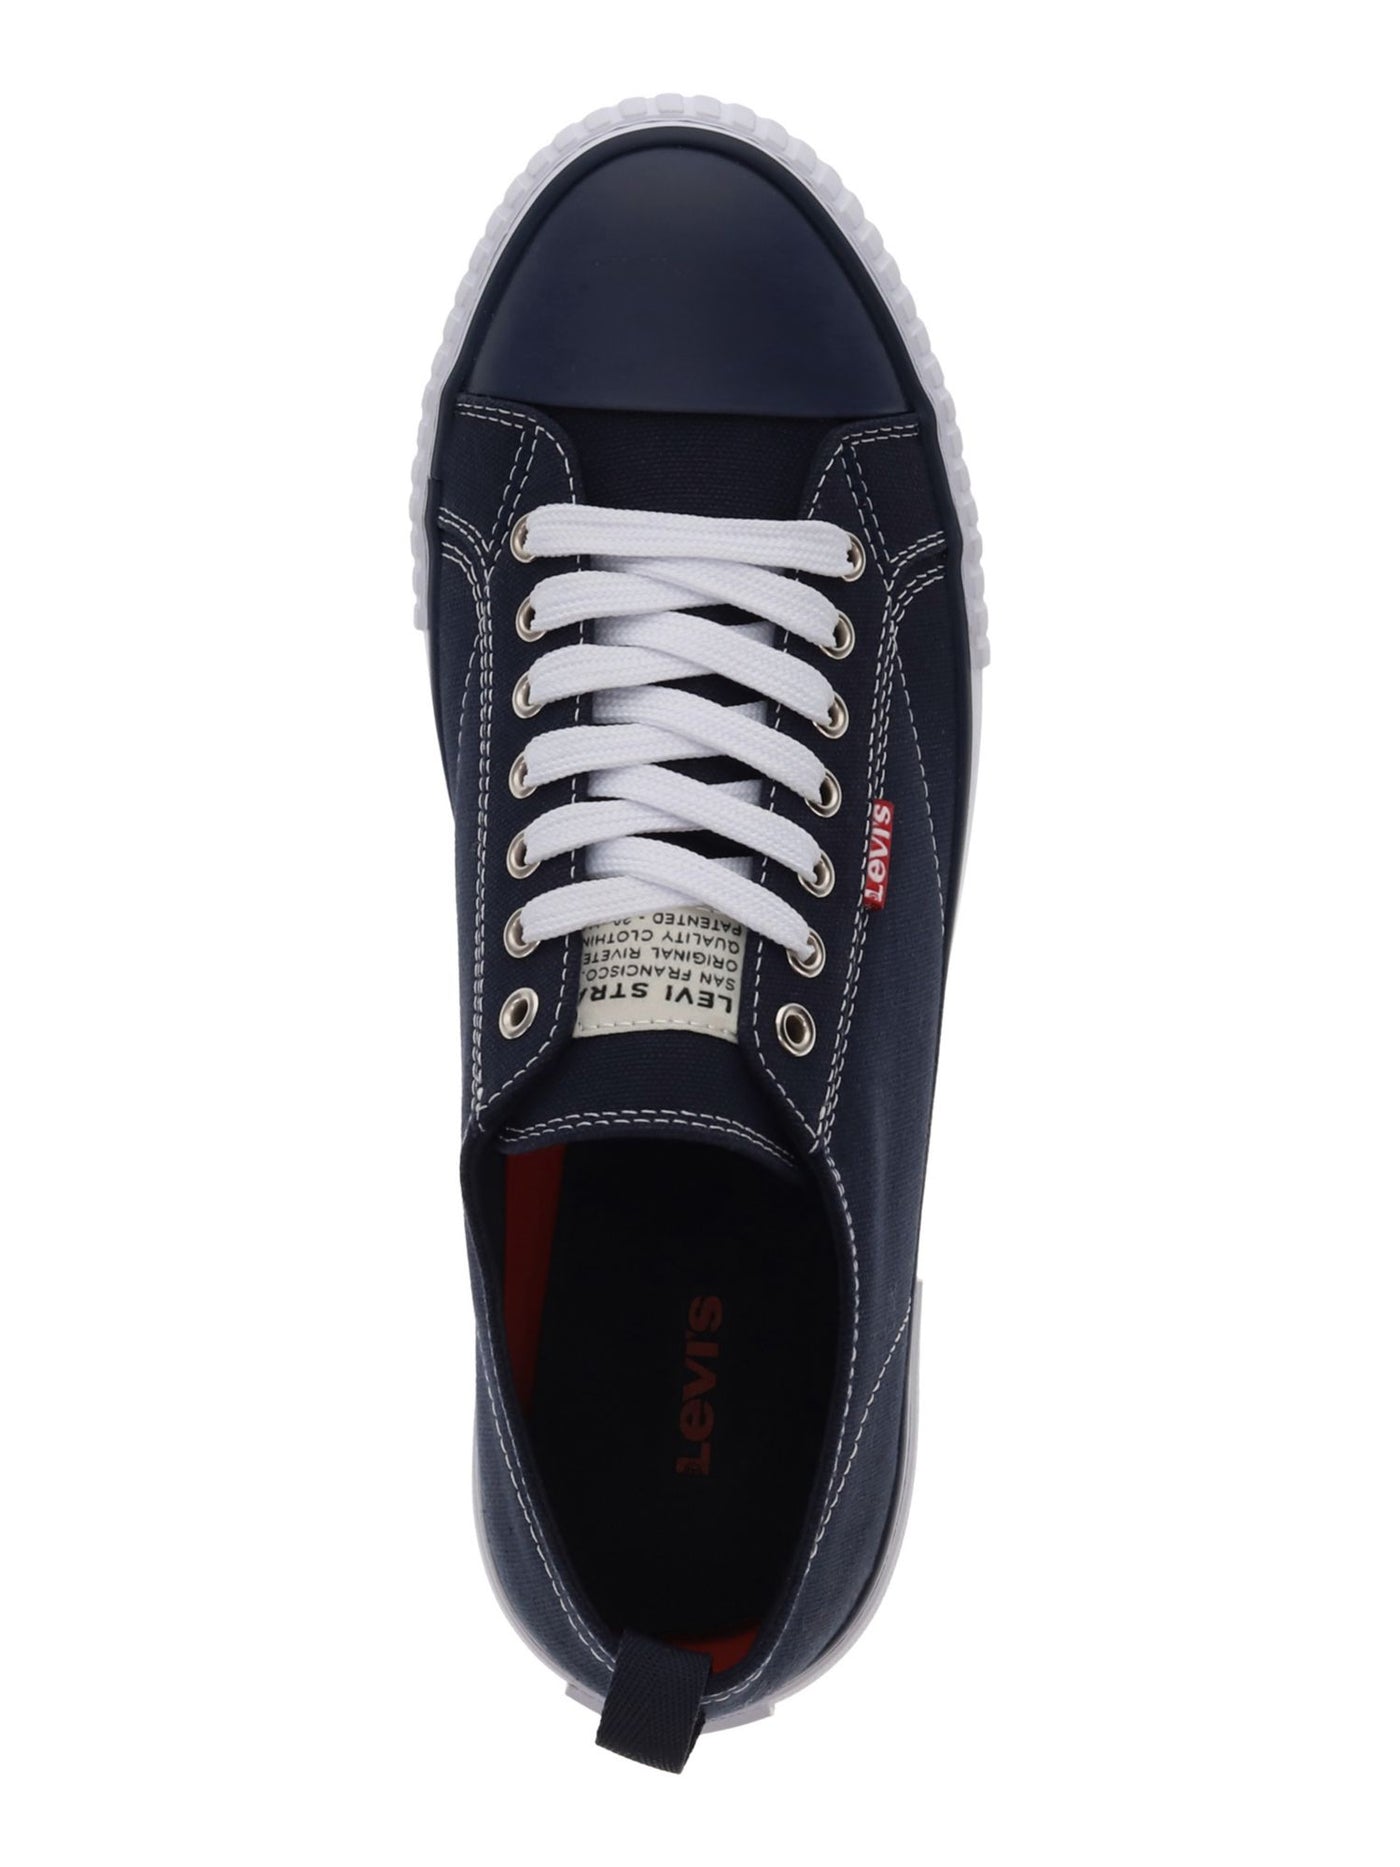 LEVI'S Mens Navy Removable Insole Cushioned Anikin Round Toe Lace-Up Sneakers Shoes 8 M